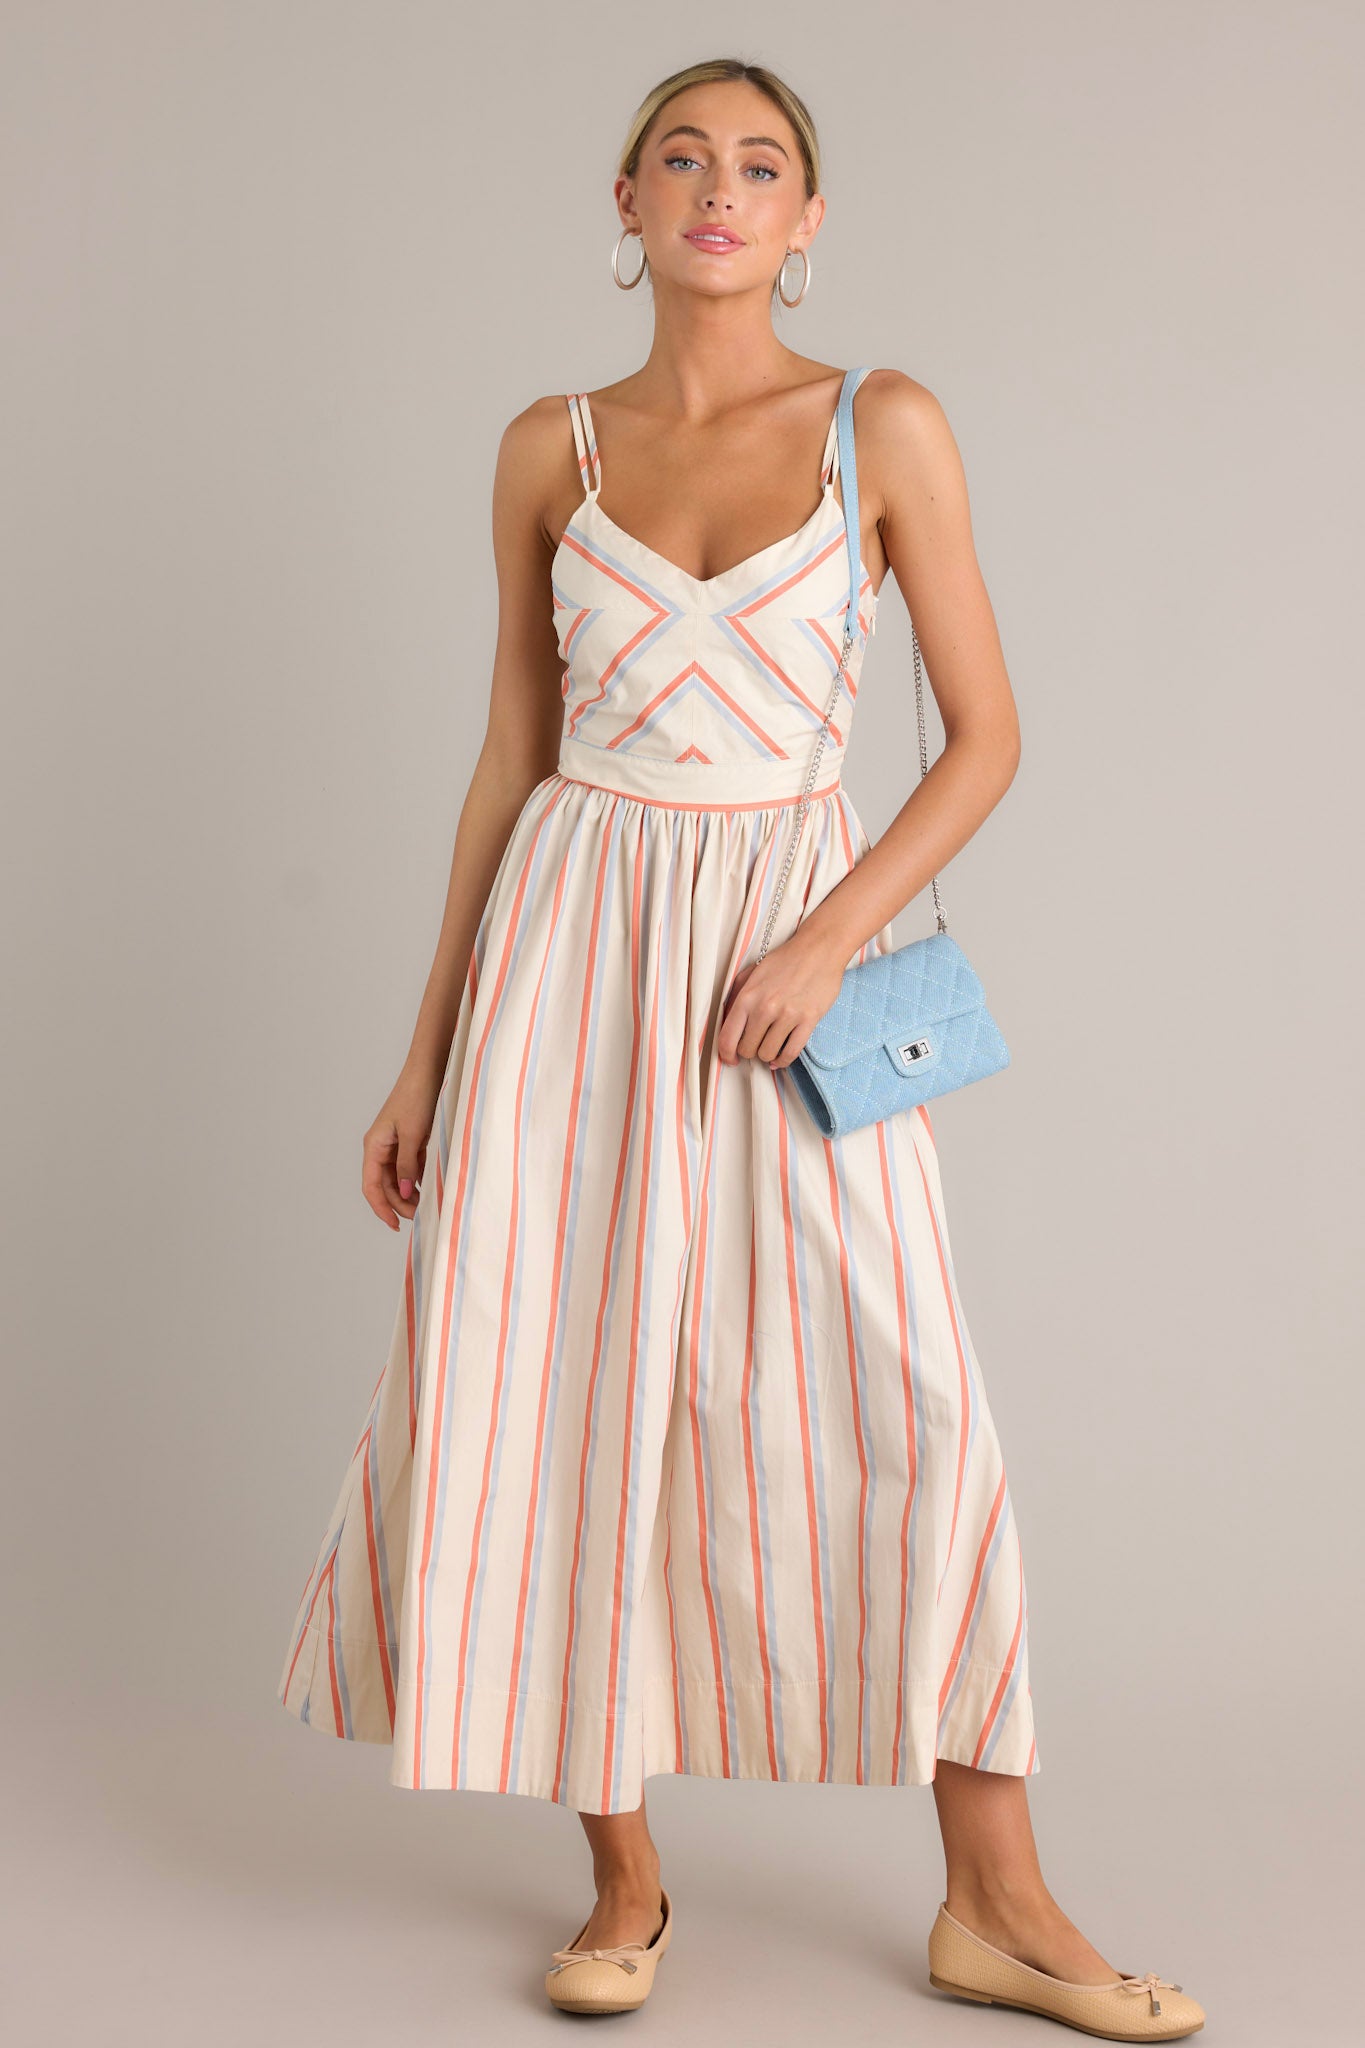 This multi stripe dress features a v-neckline, thin adjustable double straps, a smocked back insert, a discrete side zipper, a flowing silhouette and thick hemline.